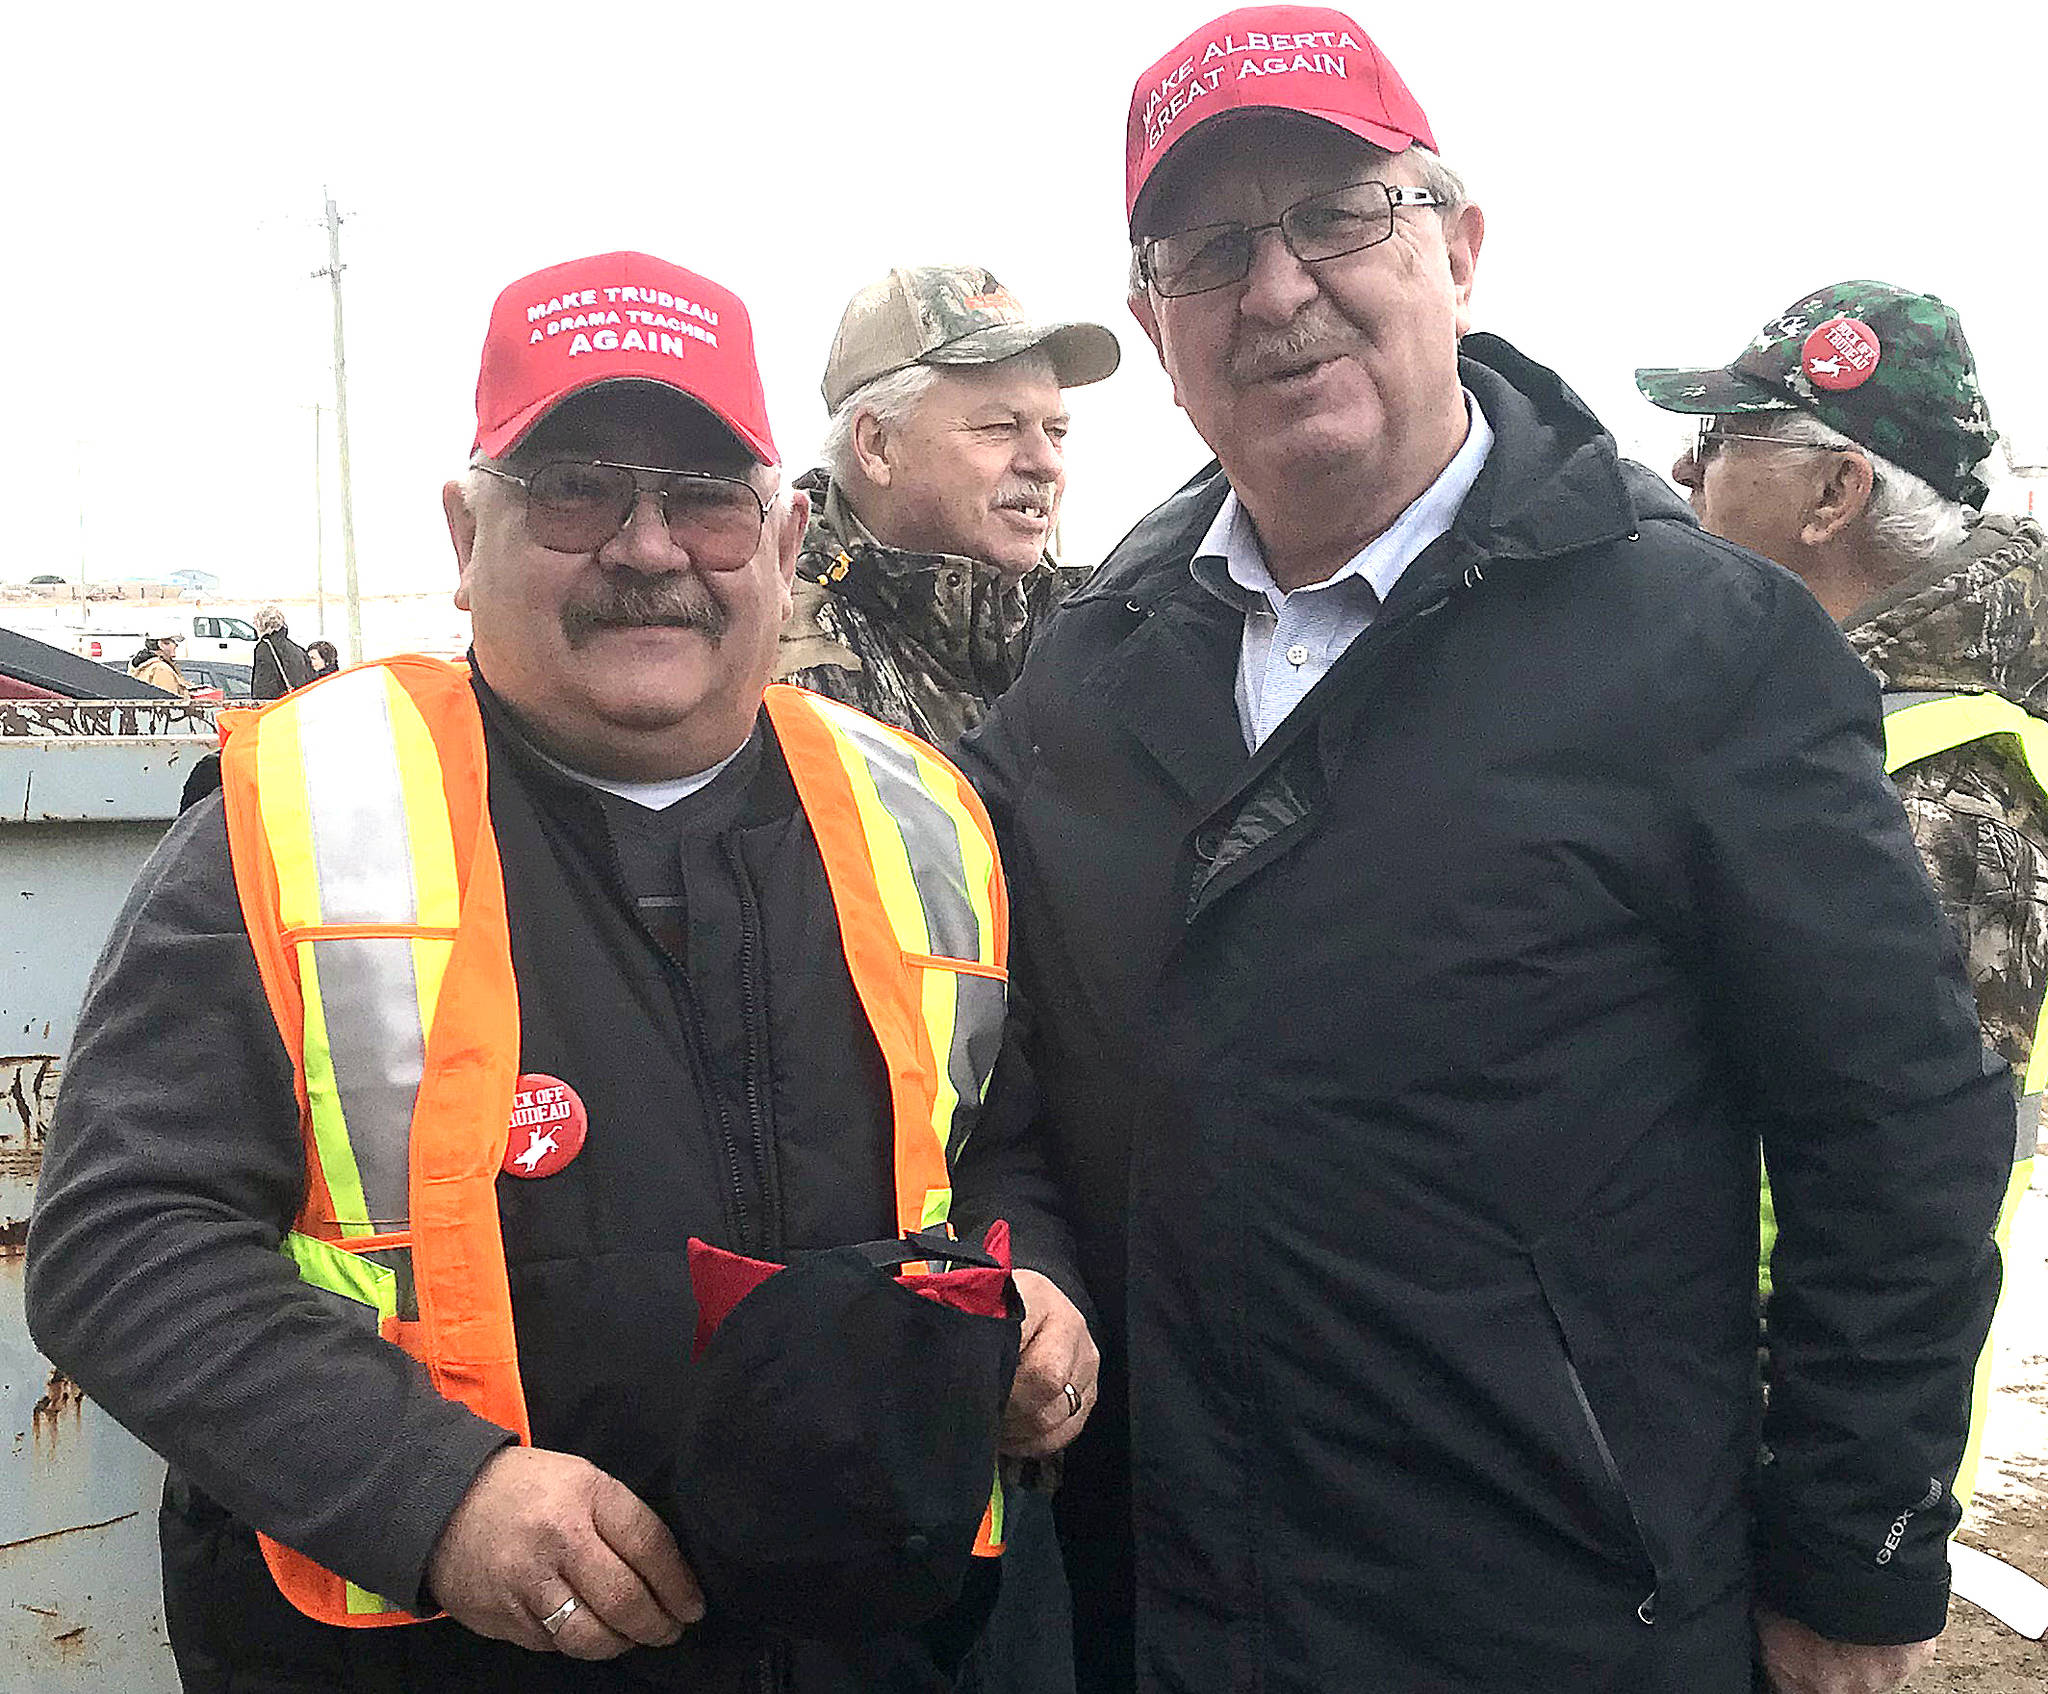 Greg Tschritter, event organizer, with MLA Rick Strankman wearing Make Alberta Great Again hats at the Stettler east Heartland Rally to support the oil and gas industry. (Lisa Joy/Stettler Independent)